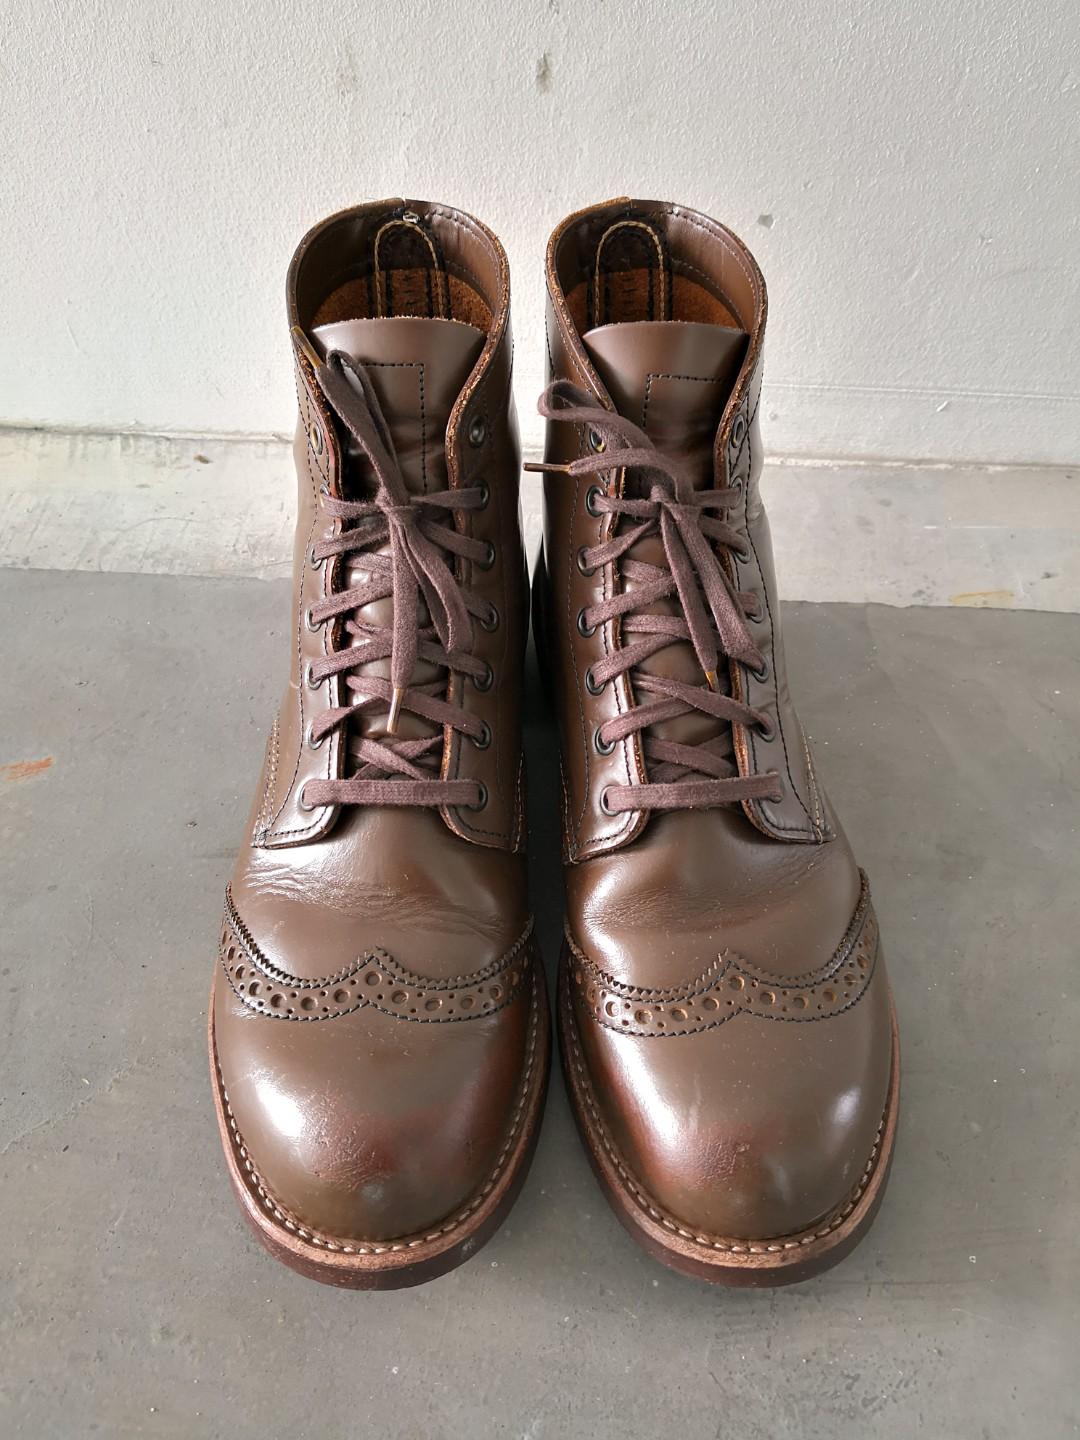 red wing brogue